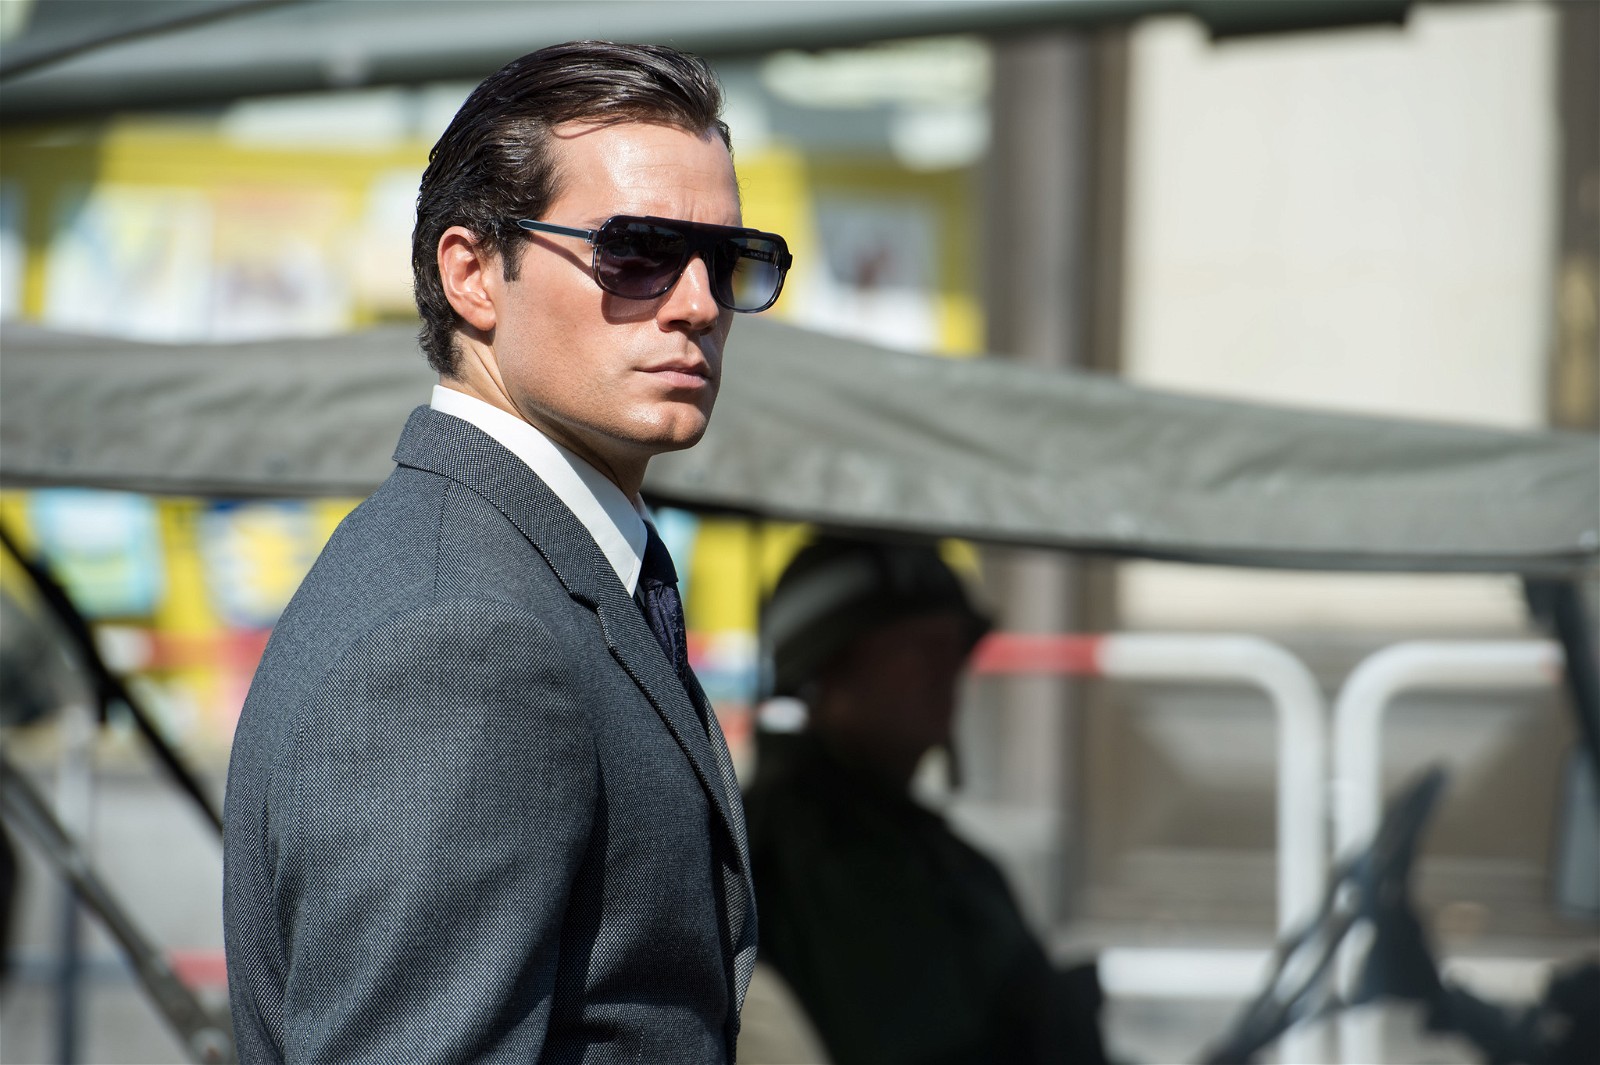 Henry Cavill in The Man from U.N.C.L.E